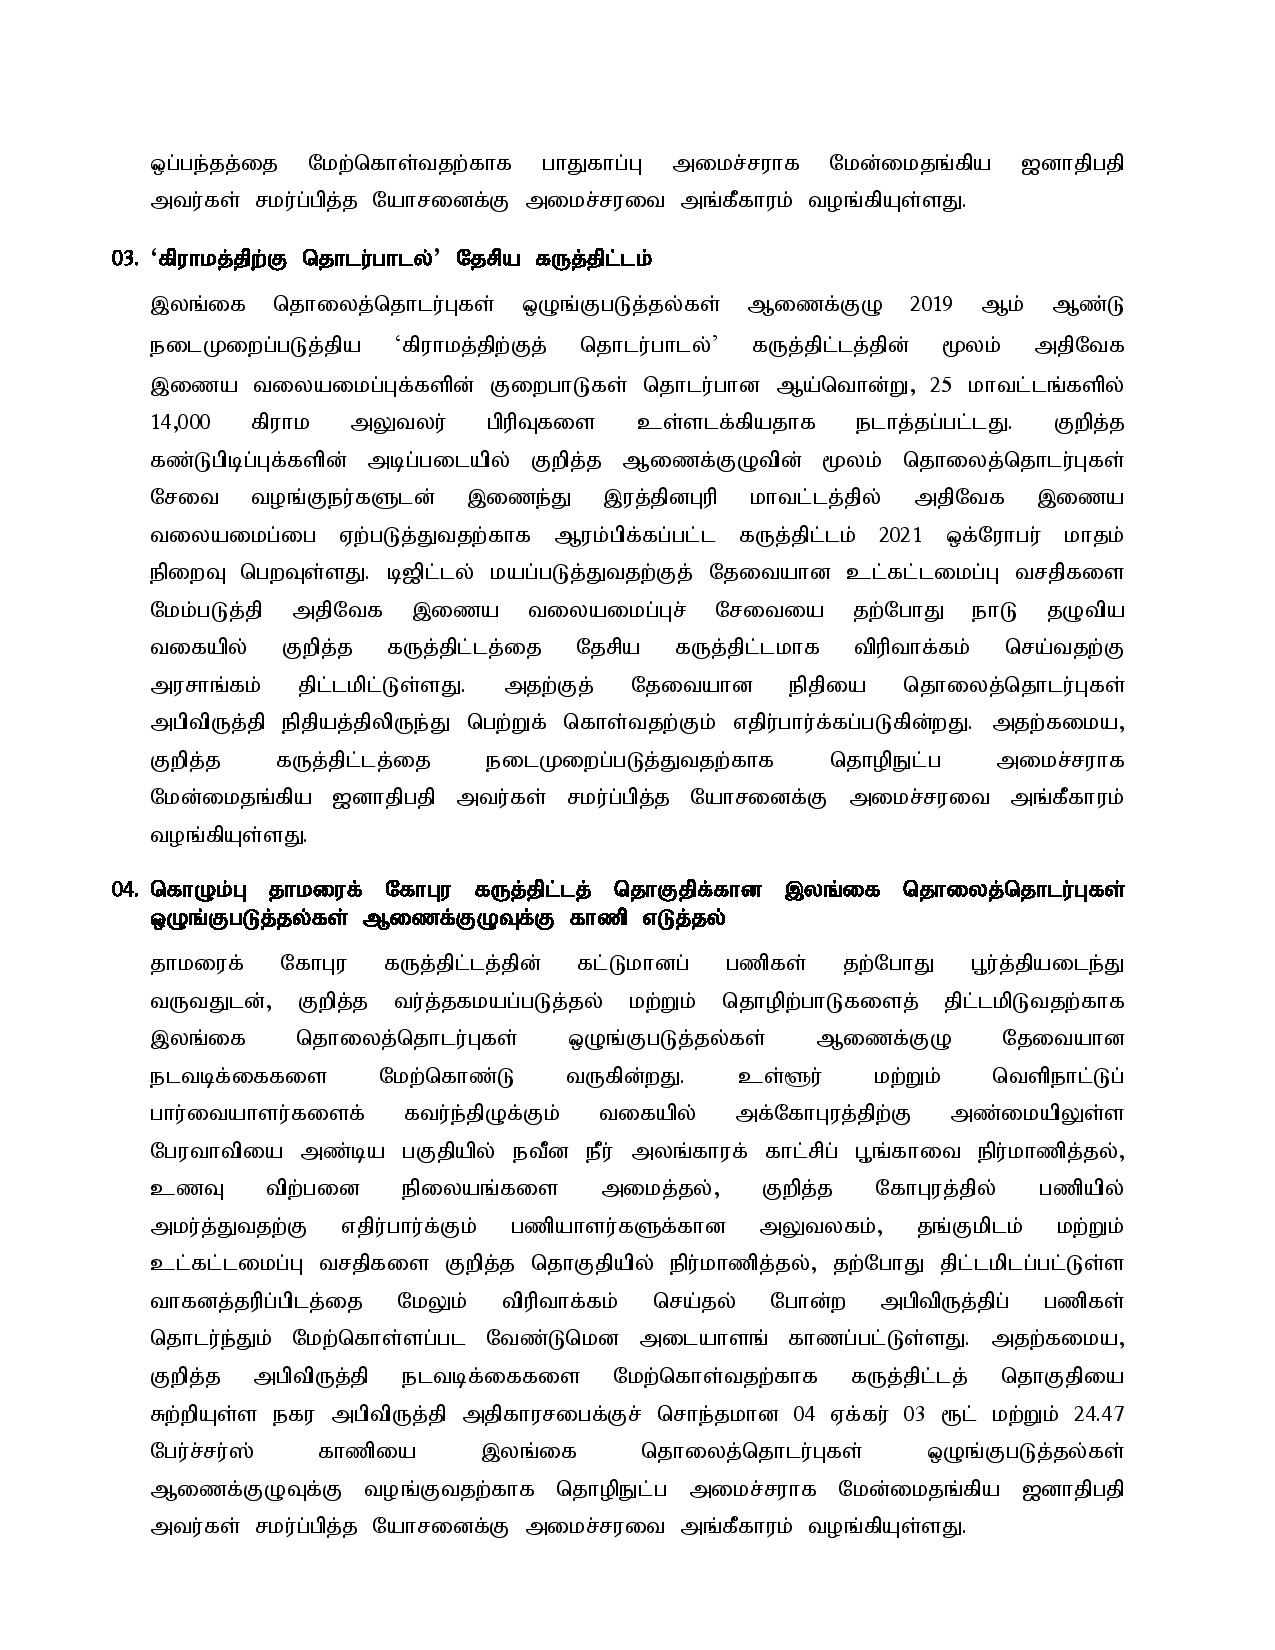 Cabinet Decision on 05.10.2021 Tamil page 002